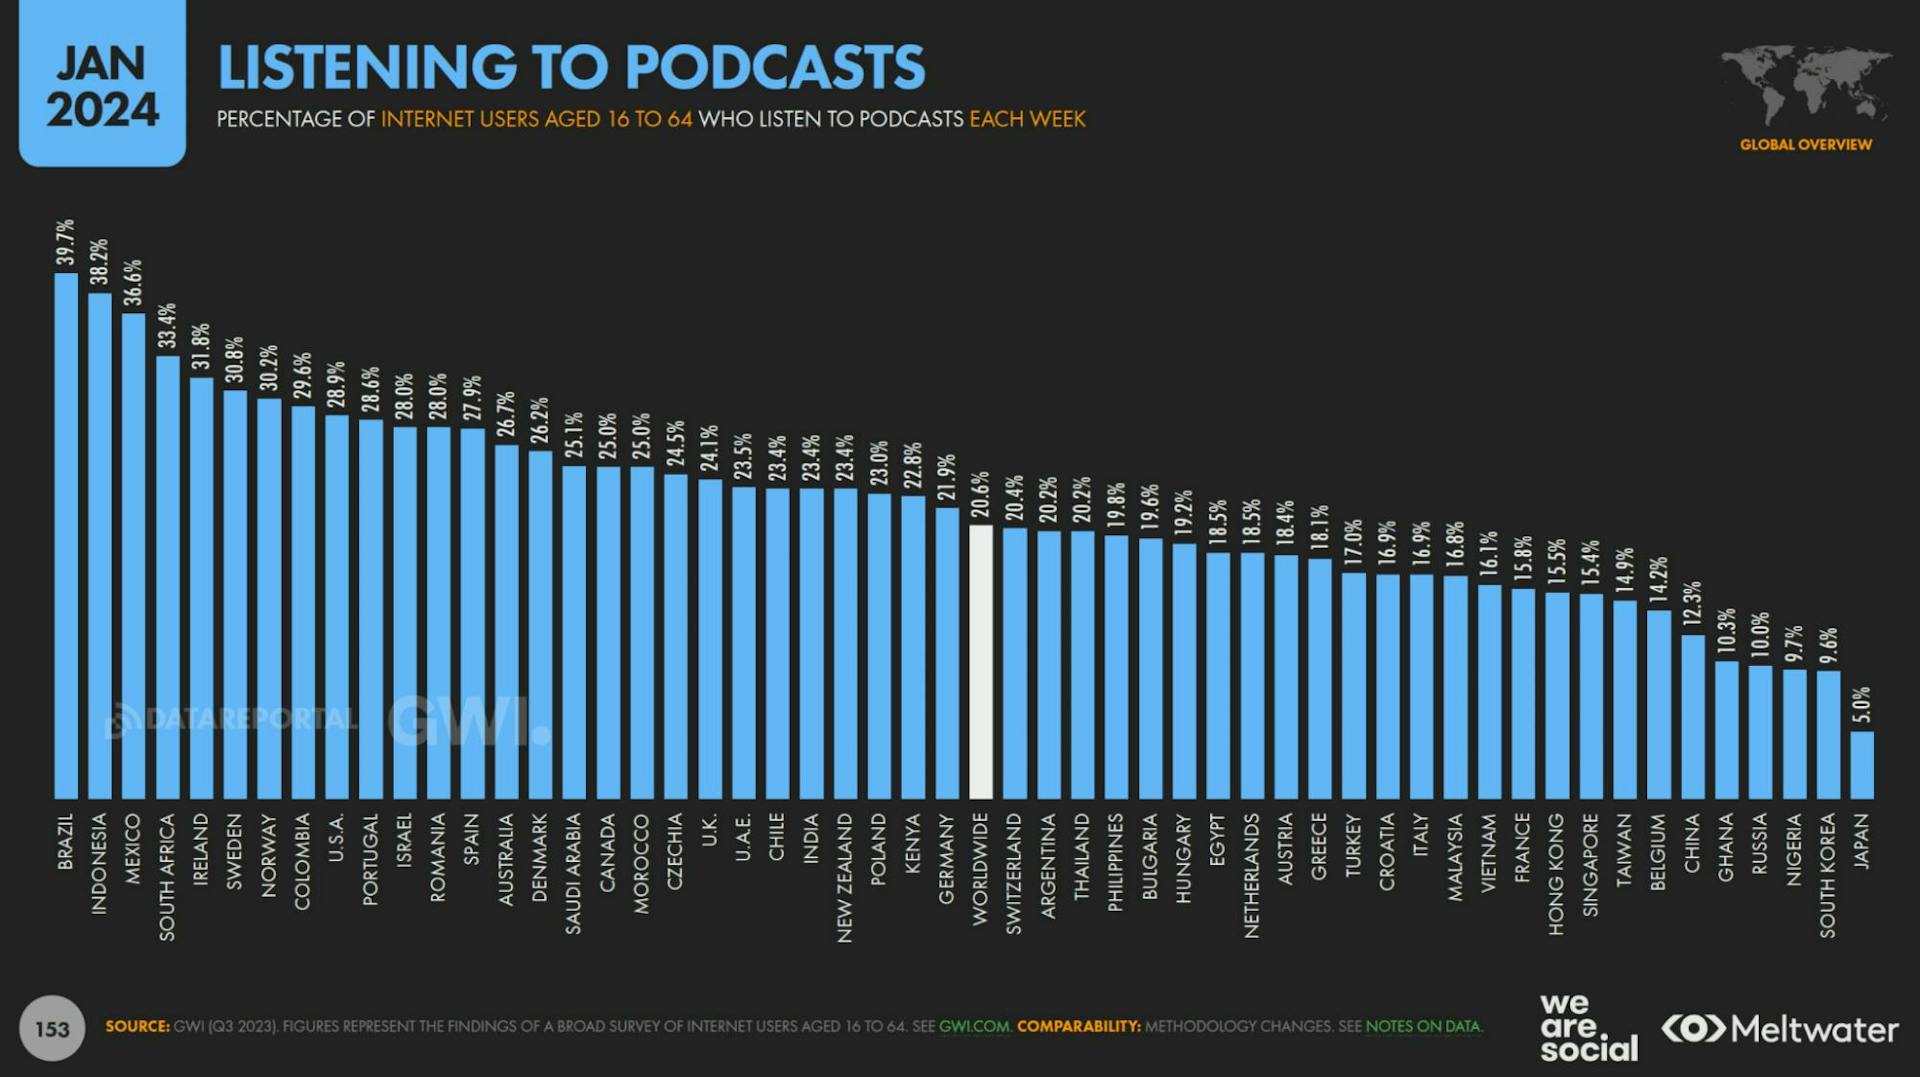 2024 Social Media Statistics South Africa: Listening to podcasts